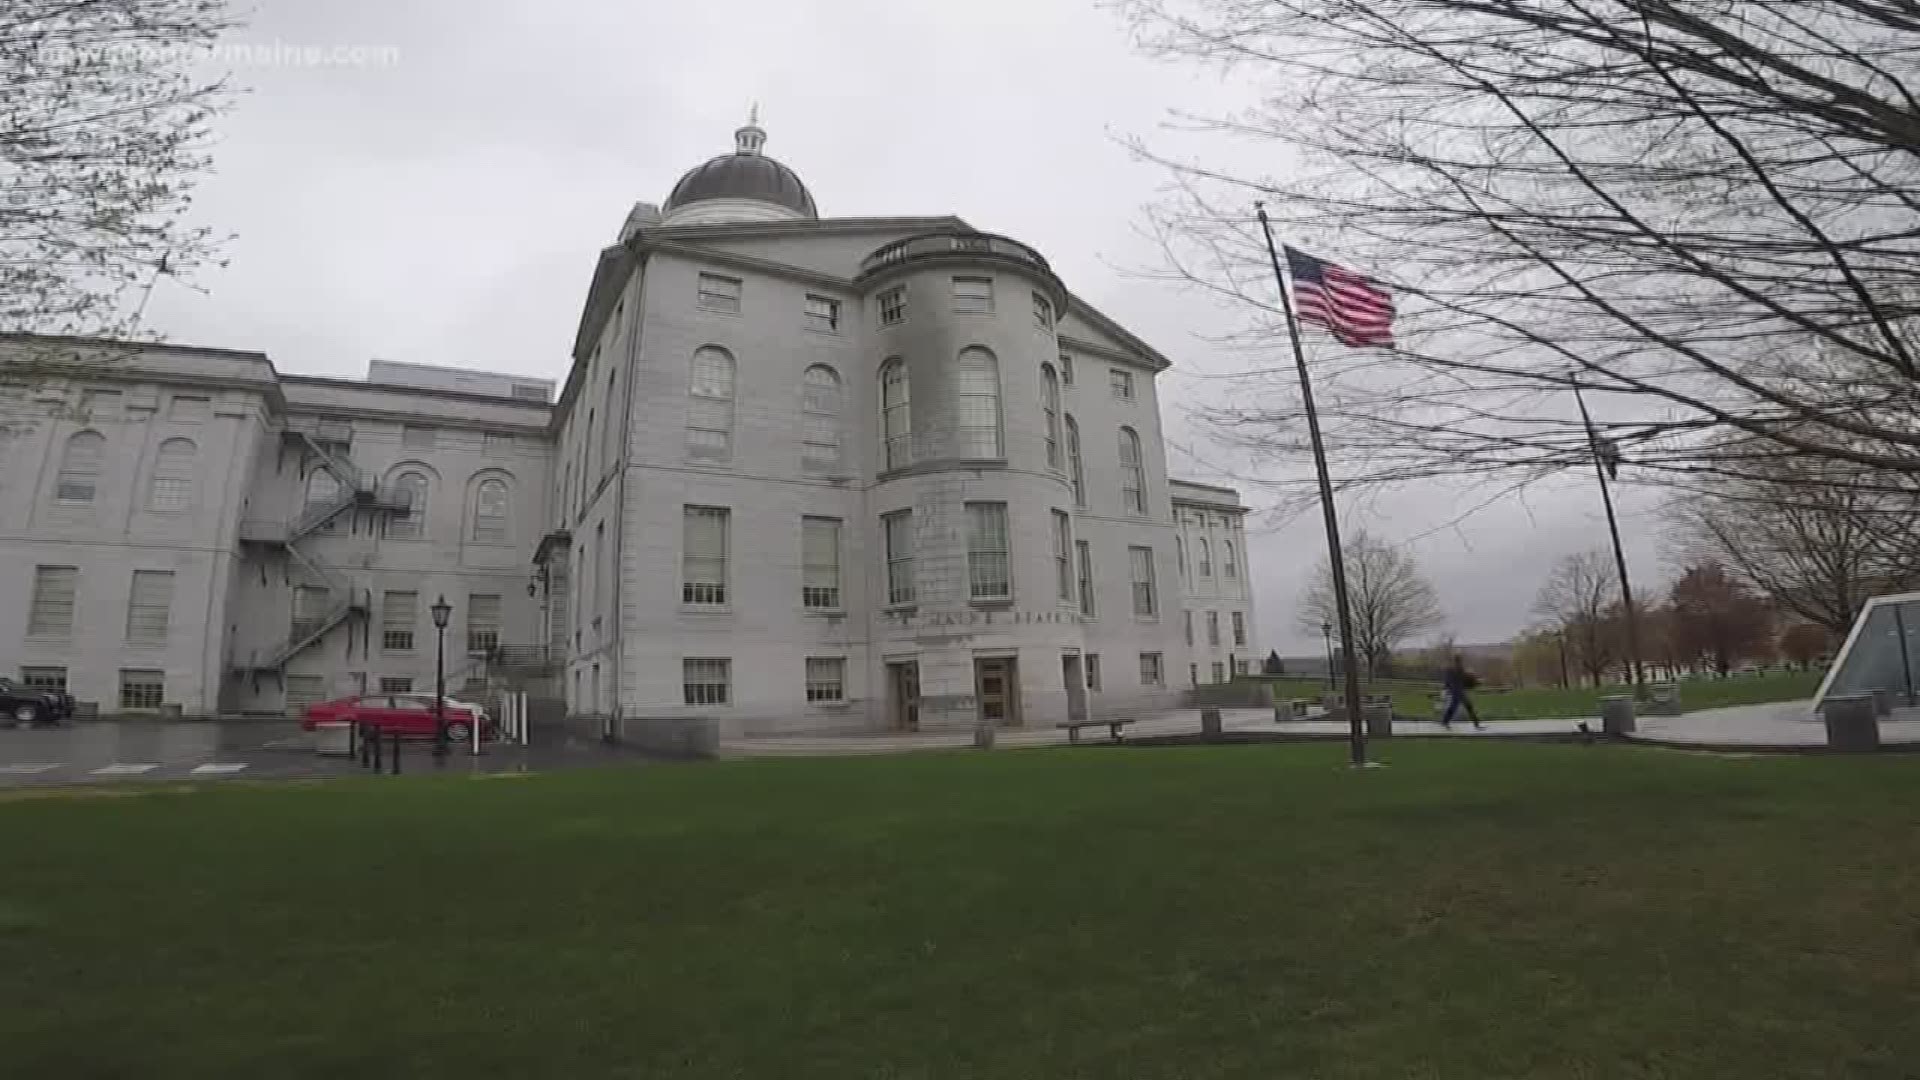 The Maine Senate voted through a bill on Tuesday to prevent religious and philosophical exemptions from vaccinations.